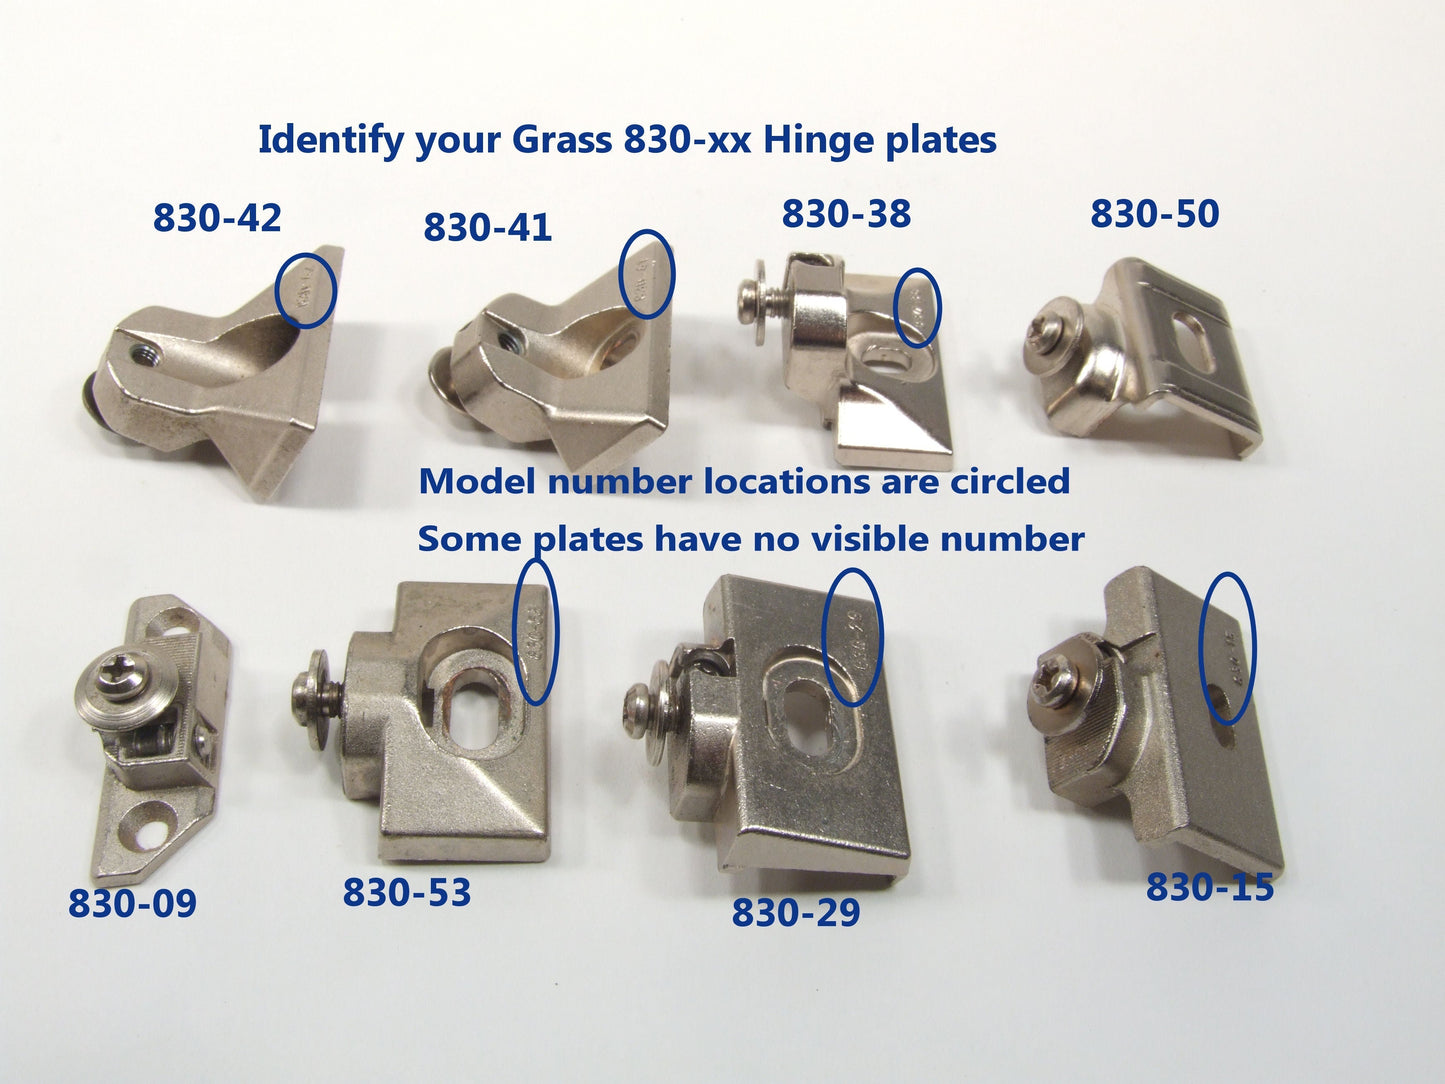 Grass 830-19 Soft Close Replacement Hinges - Sold as PAIRS!